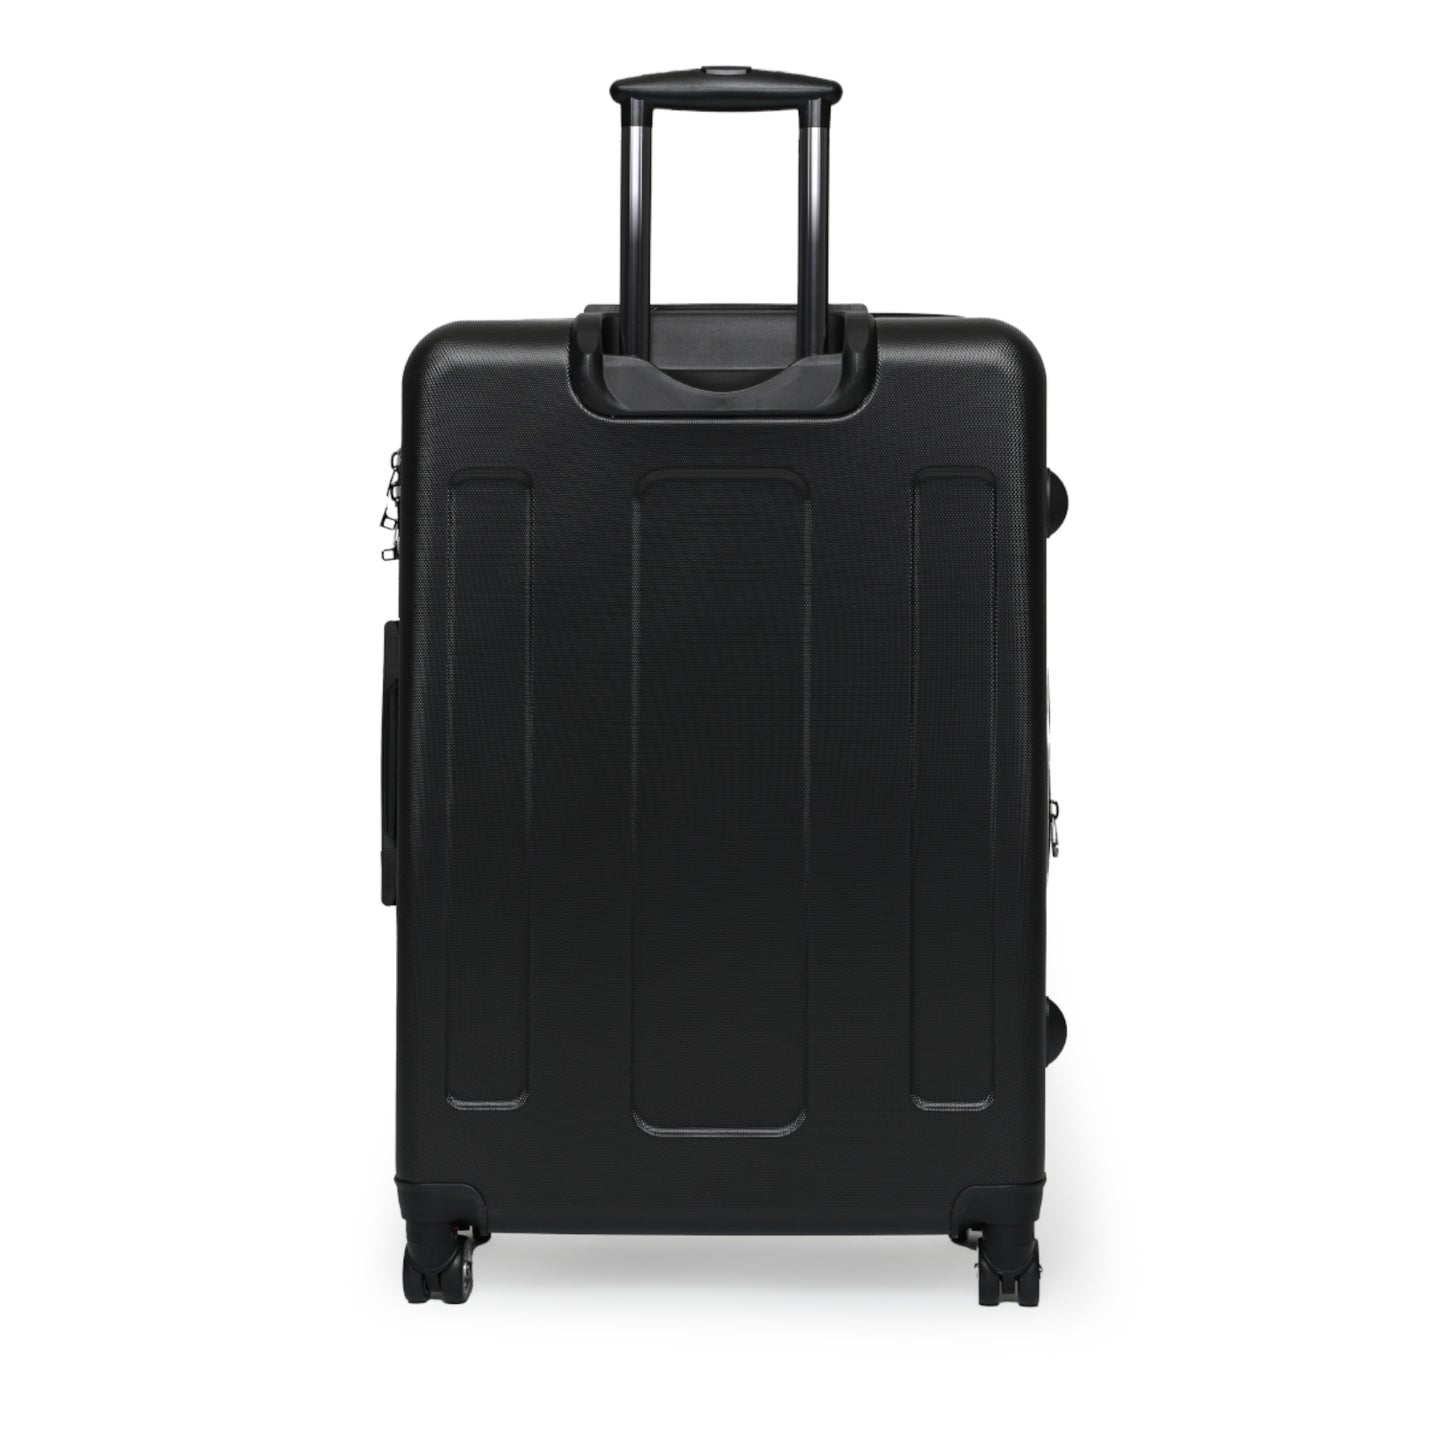 Suitcase: Your Ultimate Travel Companion in Style